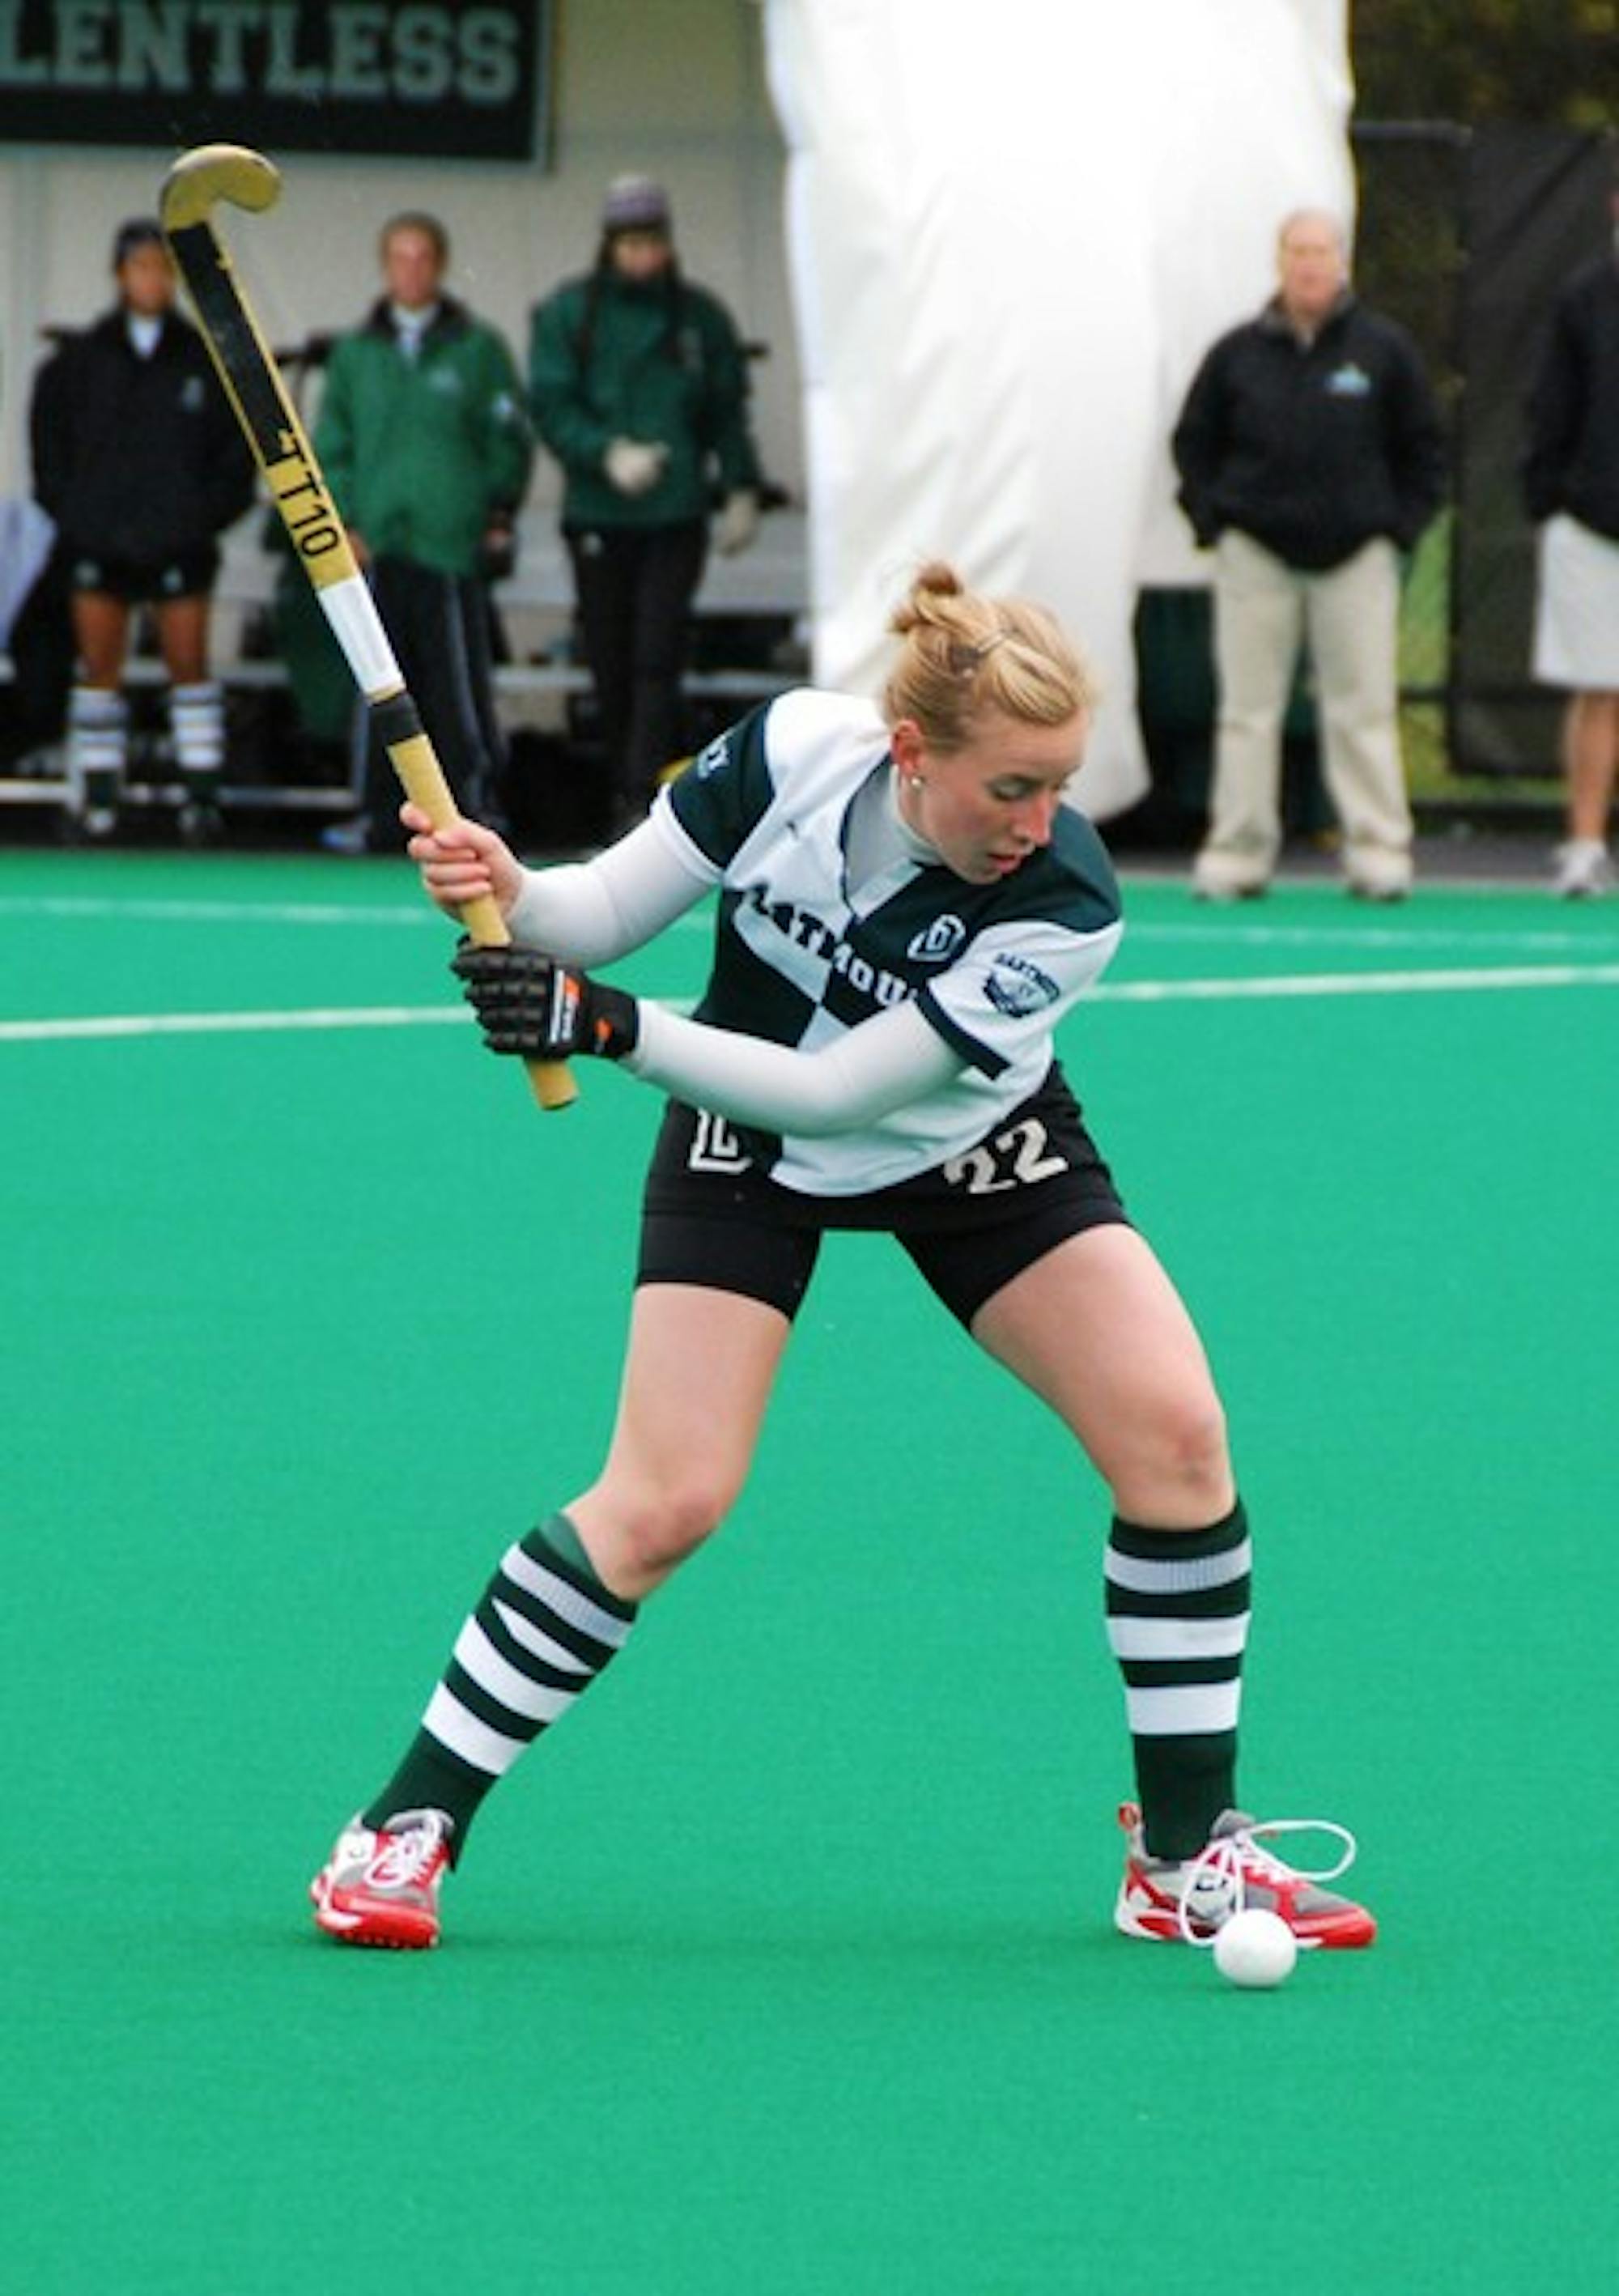 Virginia Peisch '11 tied the Dartmouth record for assists in a single season, notching two on Saturday to bring her total to 14 as Dartmouth won 3-2.